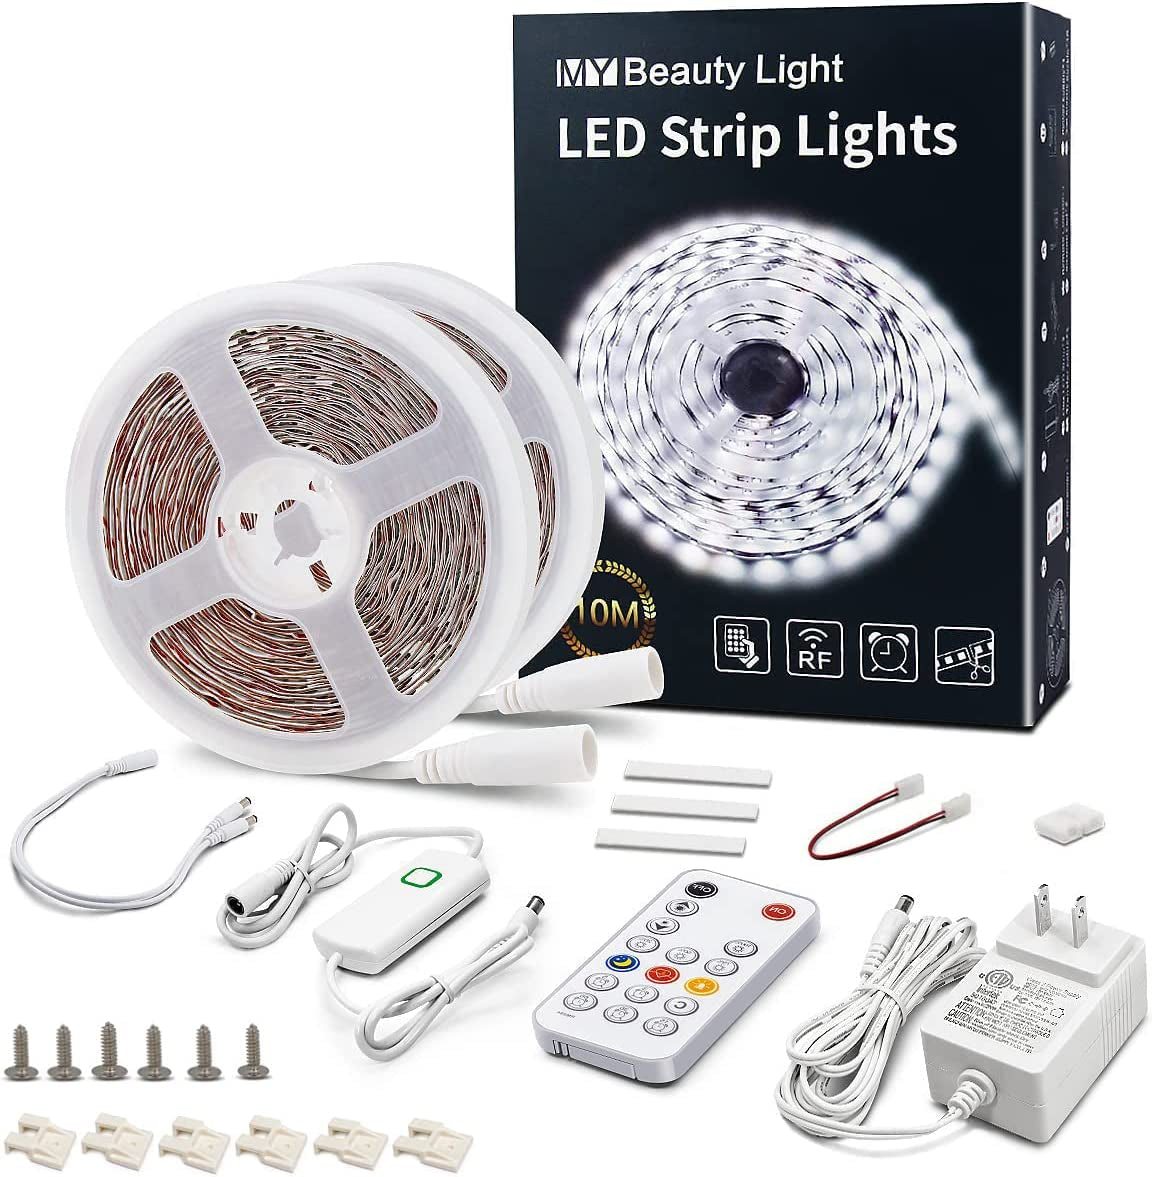 LED Strip Lights Warm White,32.8Ft Dimmable LED Light Strip with RF Remote,600 Bright 6500K 2835 Leds,Plug-In Adhesive Rope Lights with Timing Mode for Living Room Bedroom Kitchen